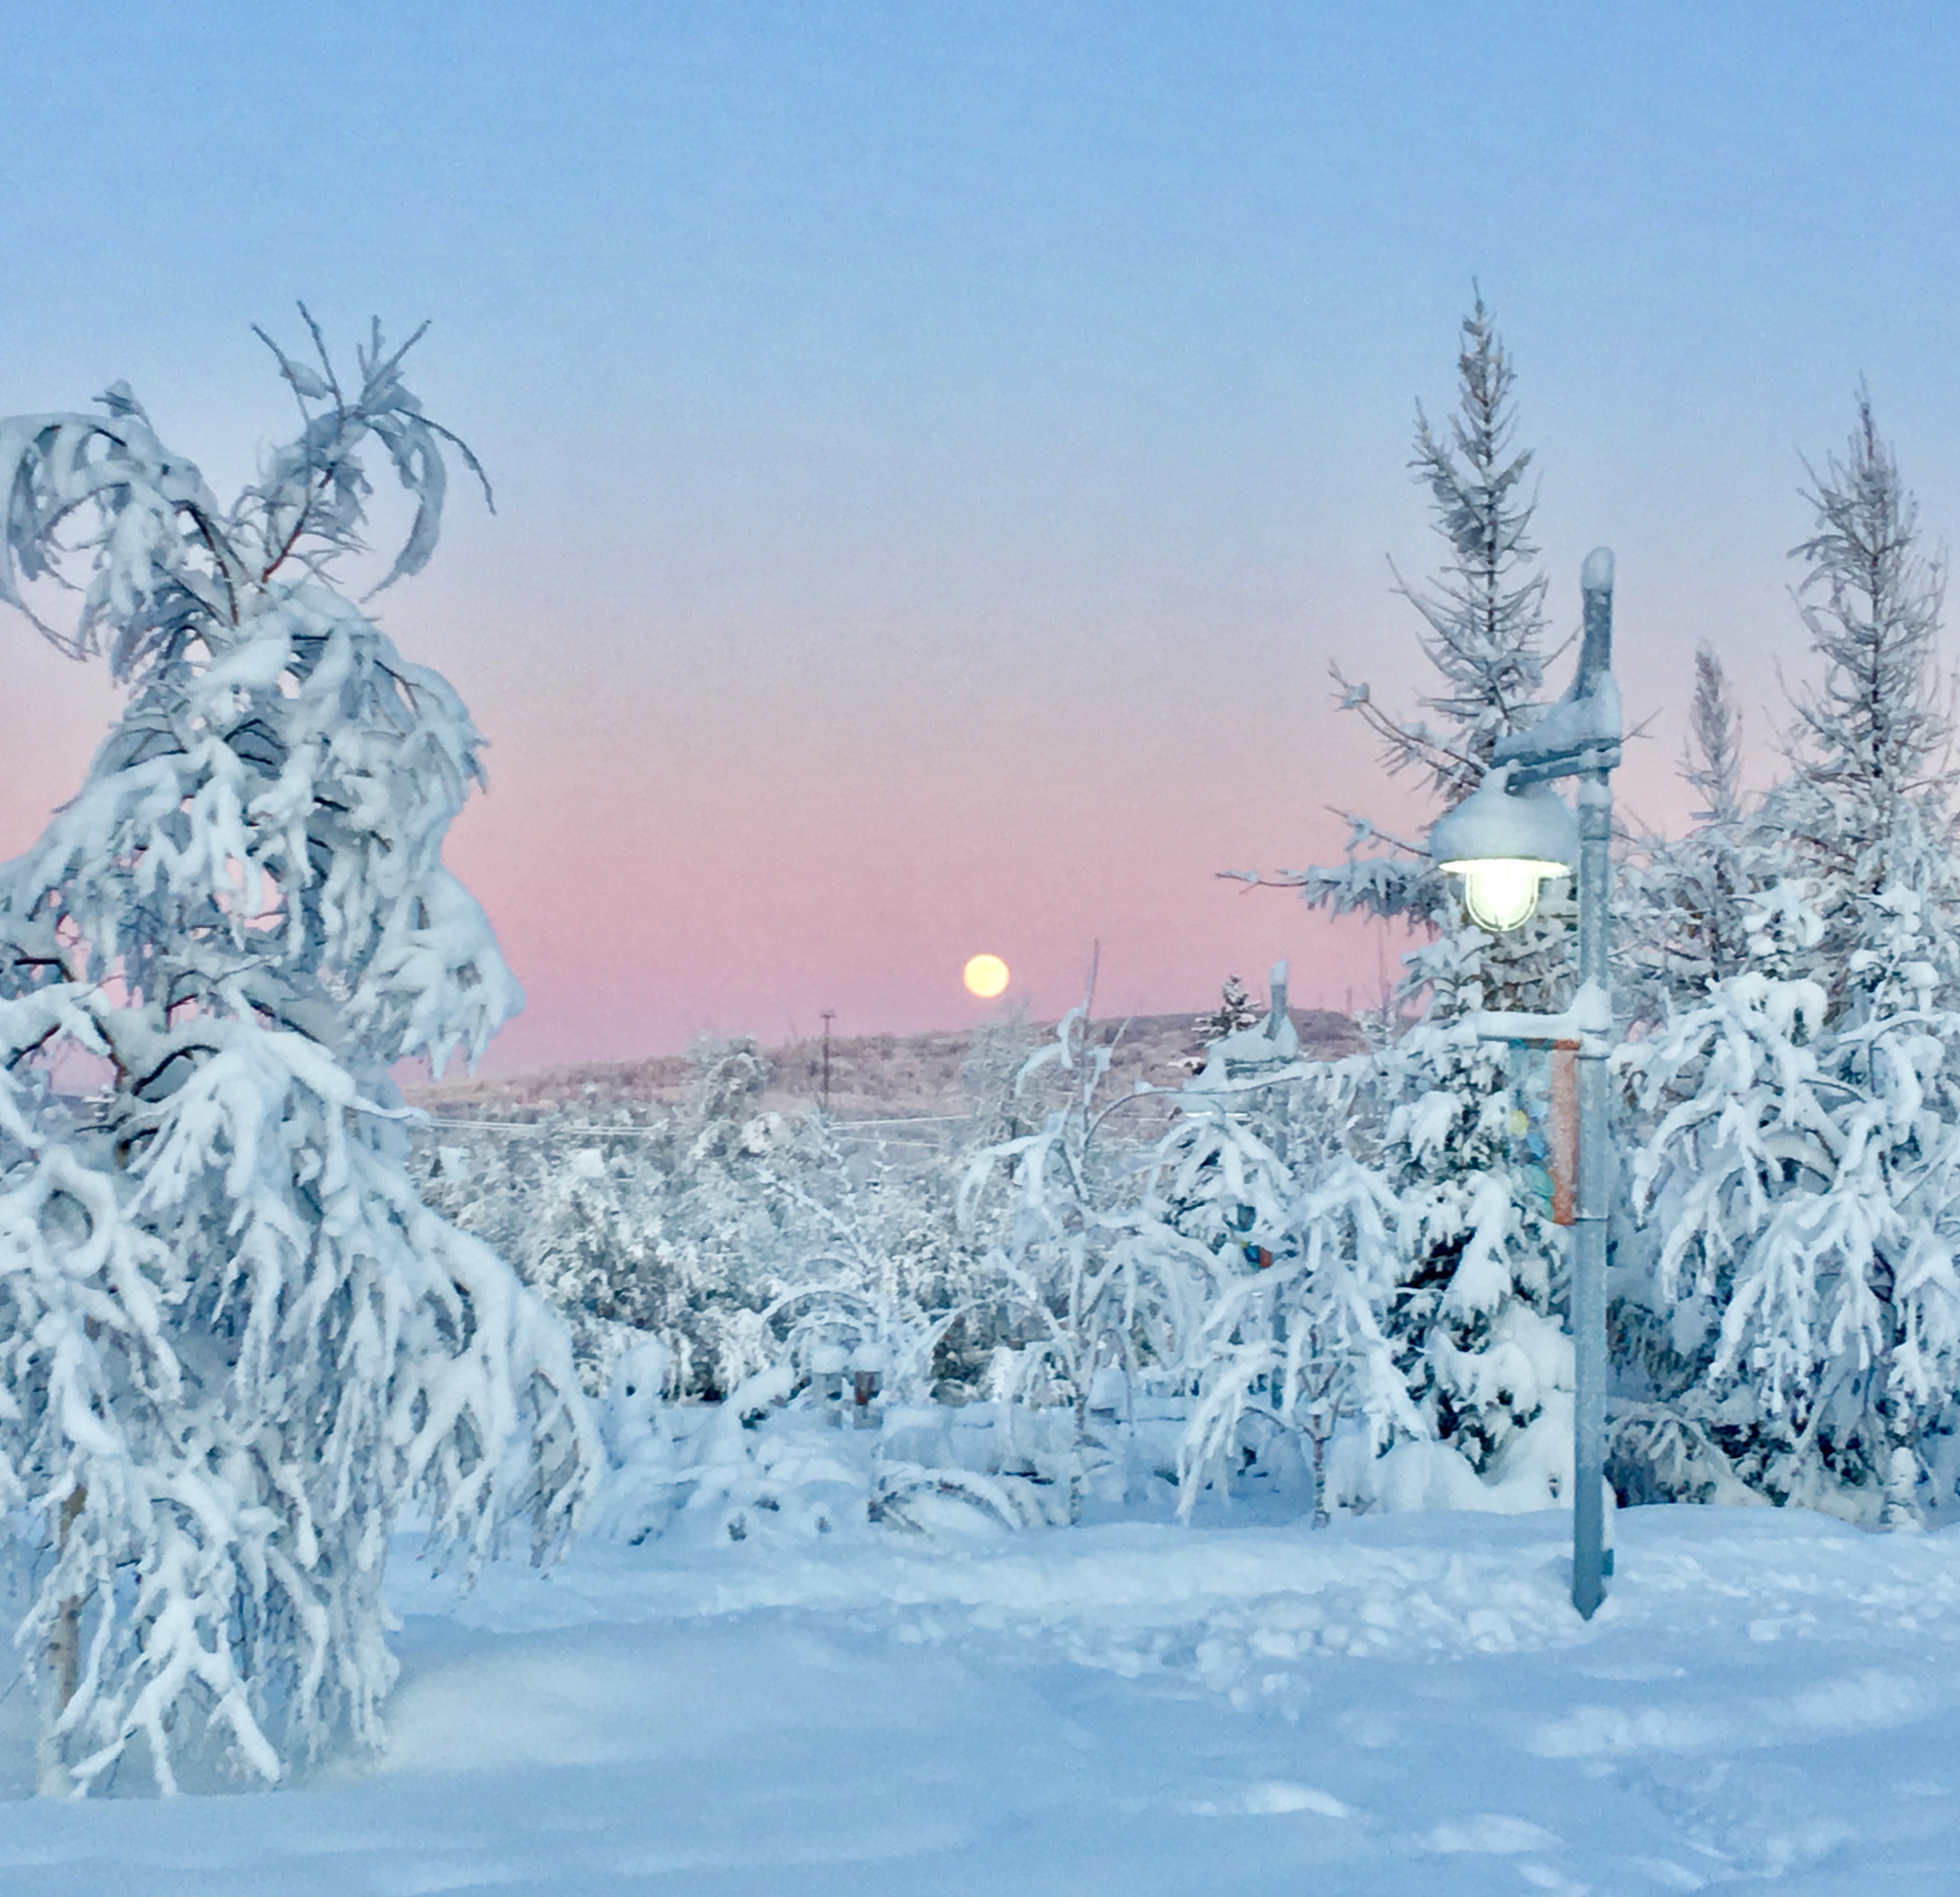 A full moon rising over a winter scene with a lamp post in foreground